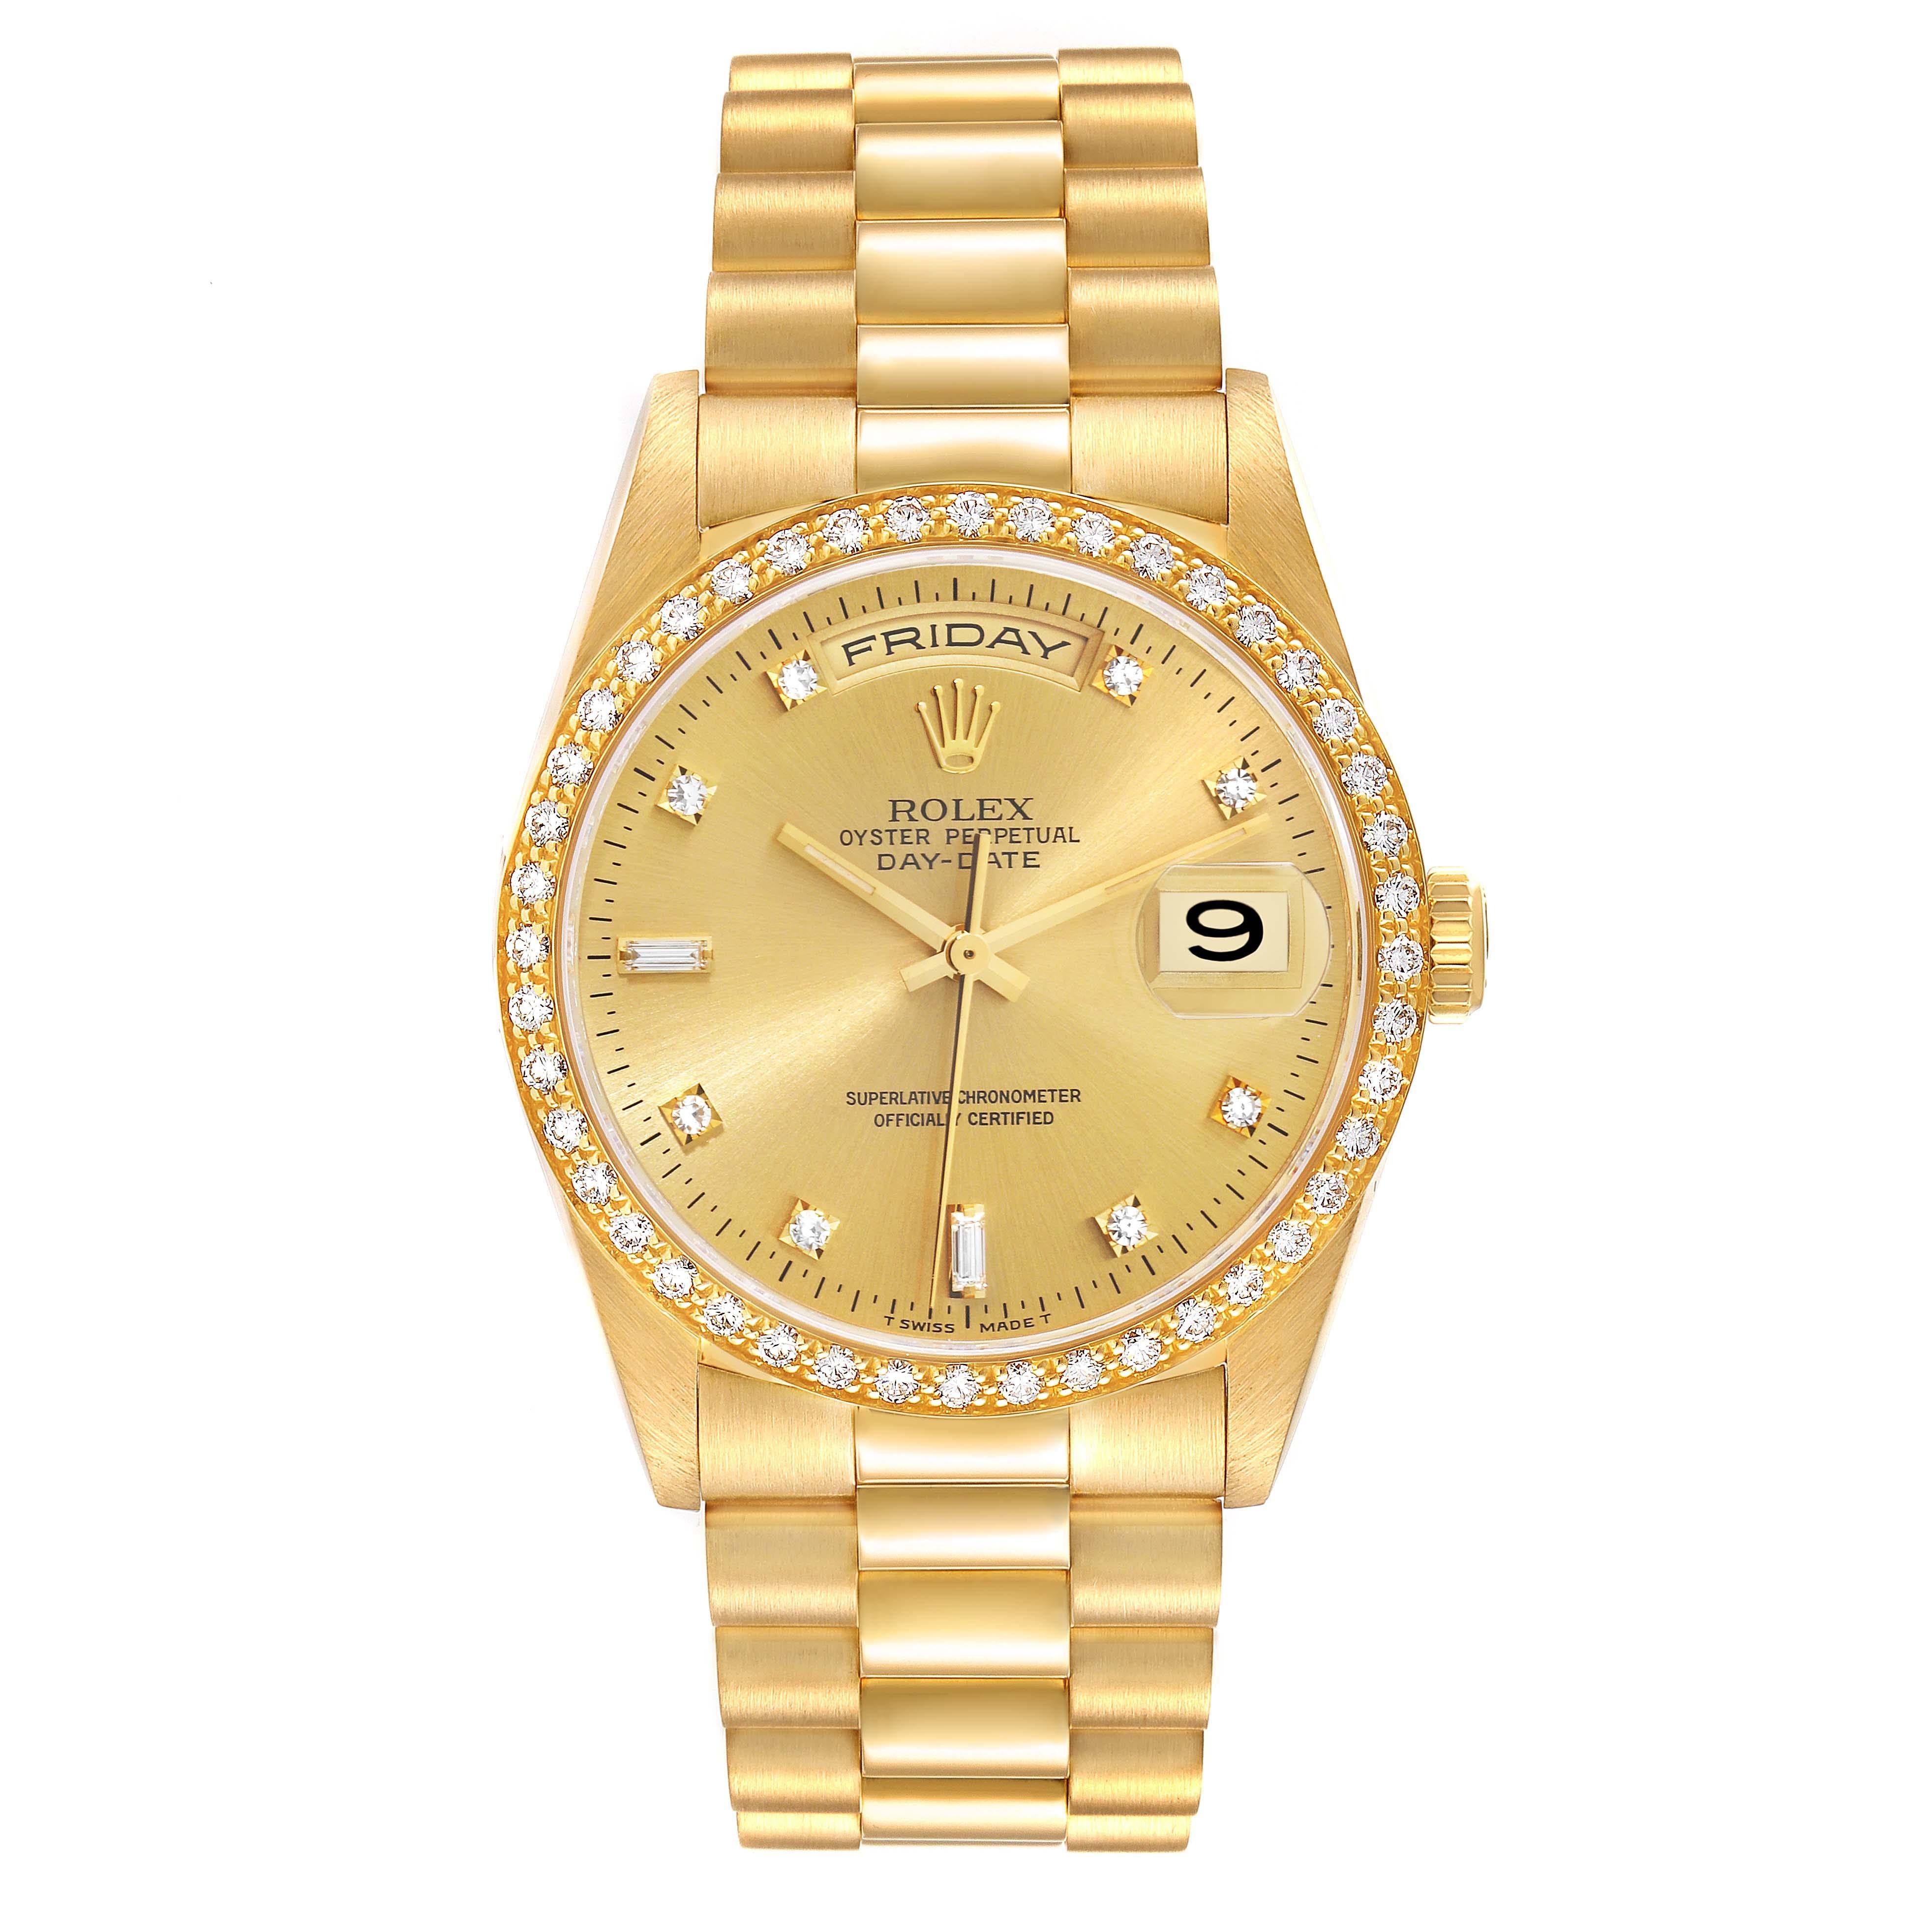 Rolex President Day Date 36mm Yellow Gold Diamond Mens Watch 18348 Box Papers. Officially certified chronometer automatic self-winding movement. 18k yellow gold oyster case 36 mm in diameter. Rolex logo on a crown. Original Rolex factory 18K yellow